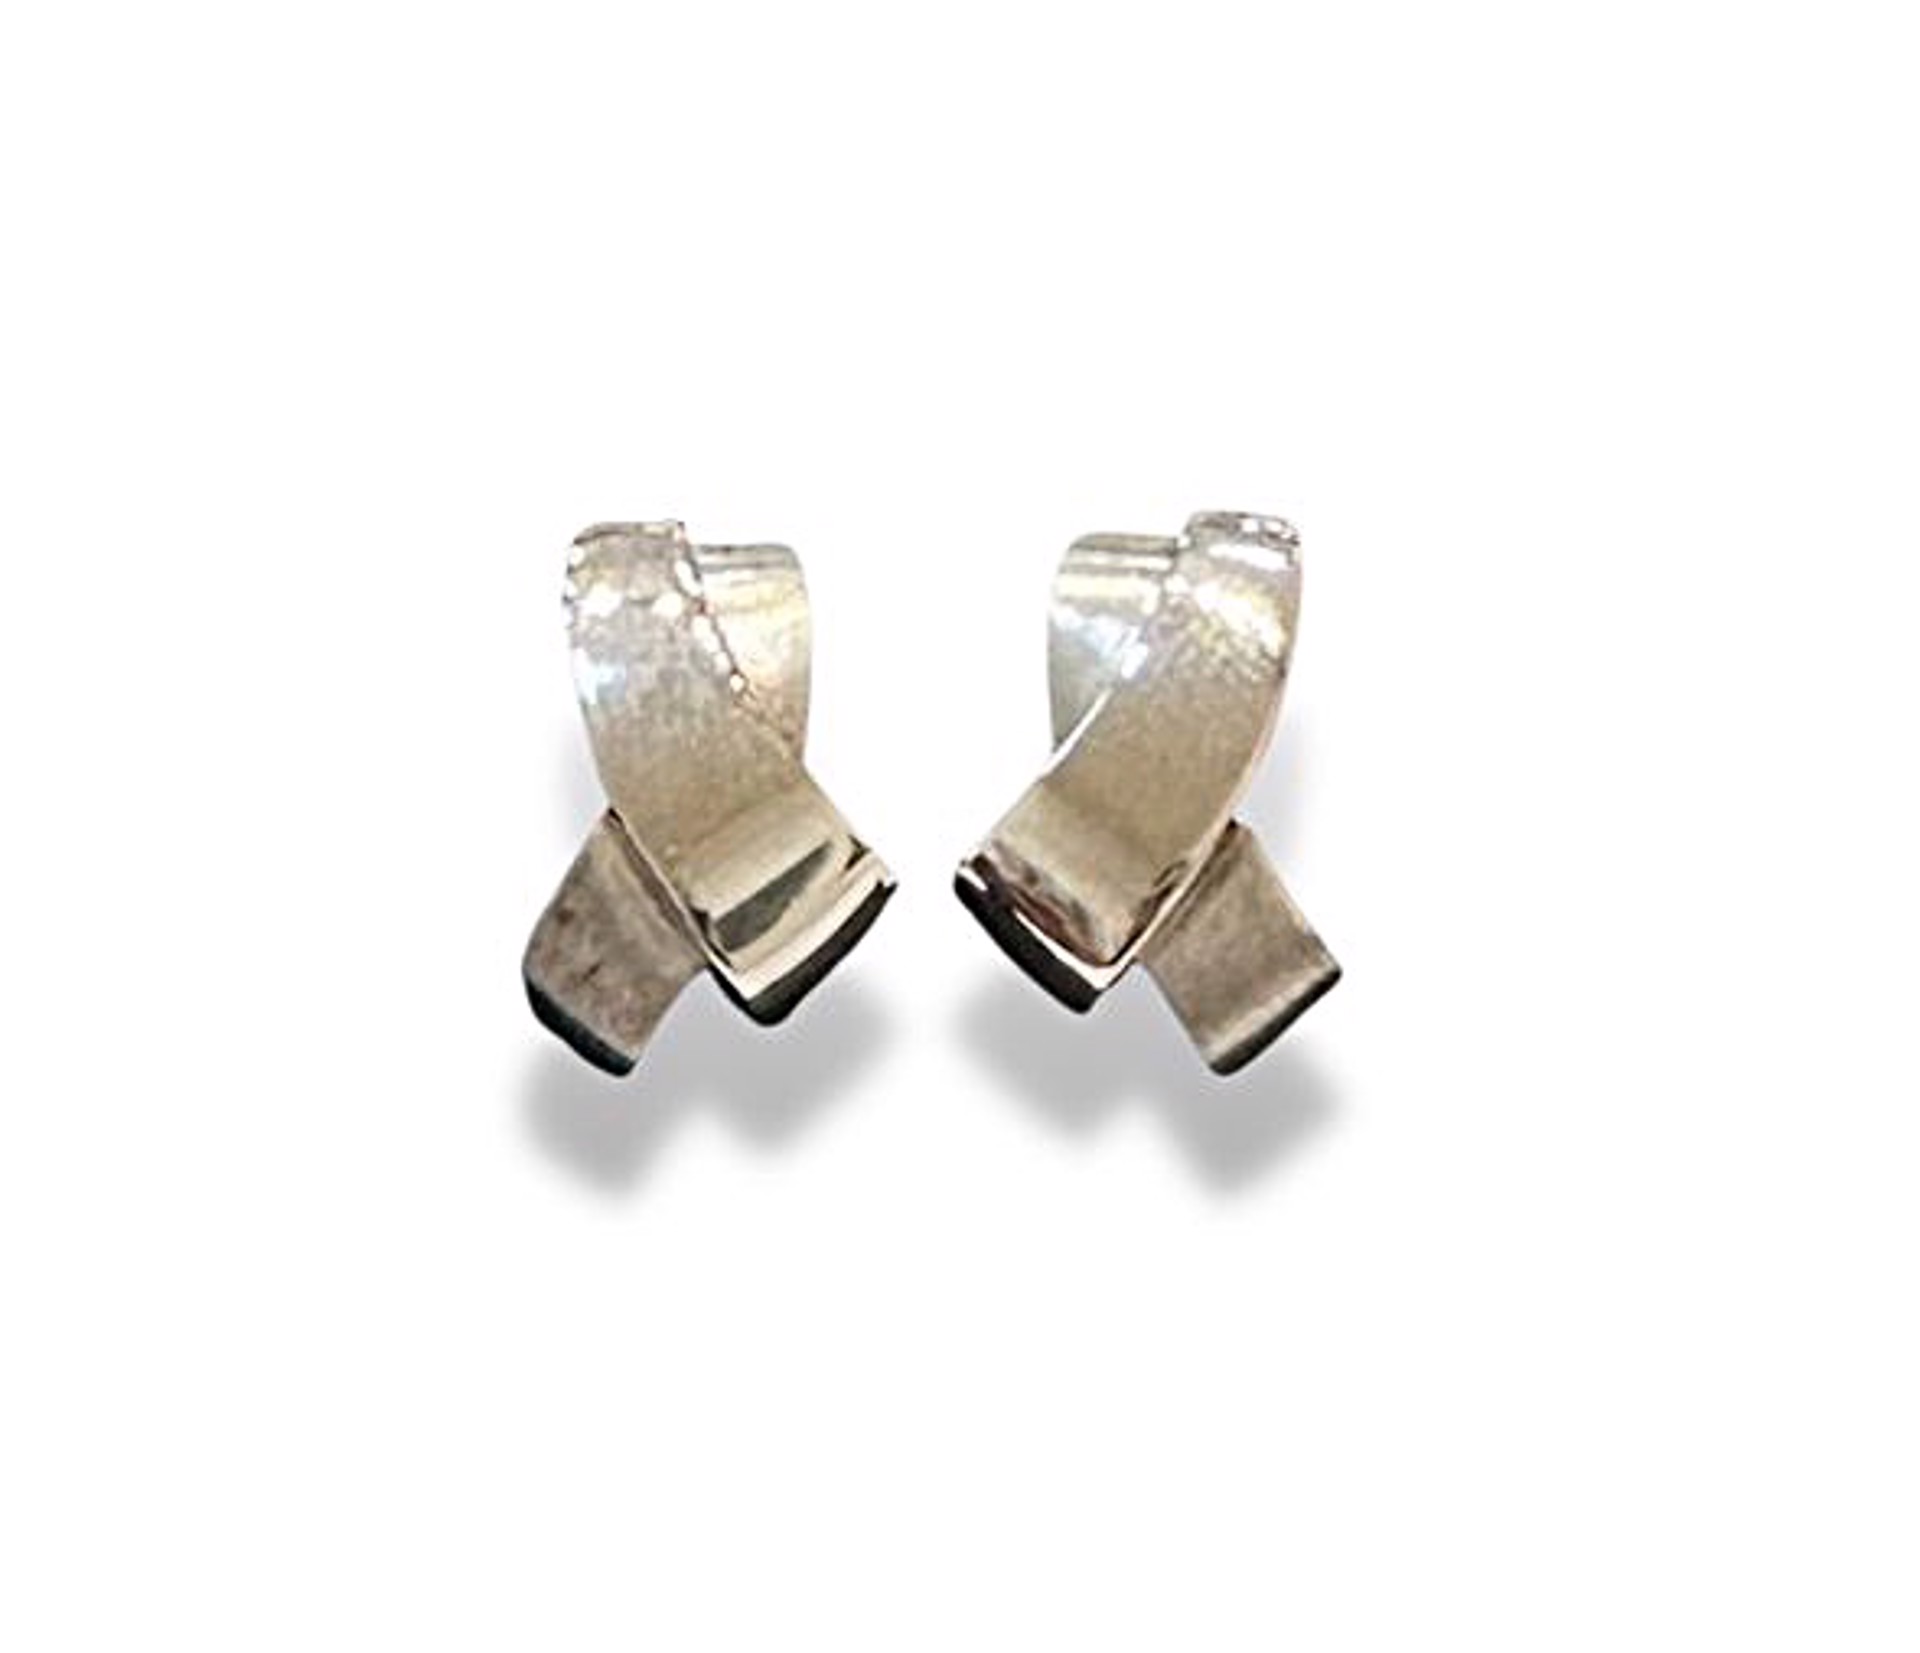 Earrings - Sterling Silver Classic Design E4329 by Joryel Vera